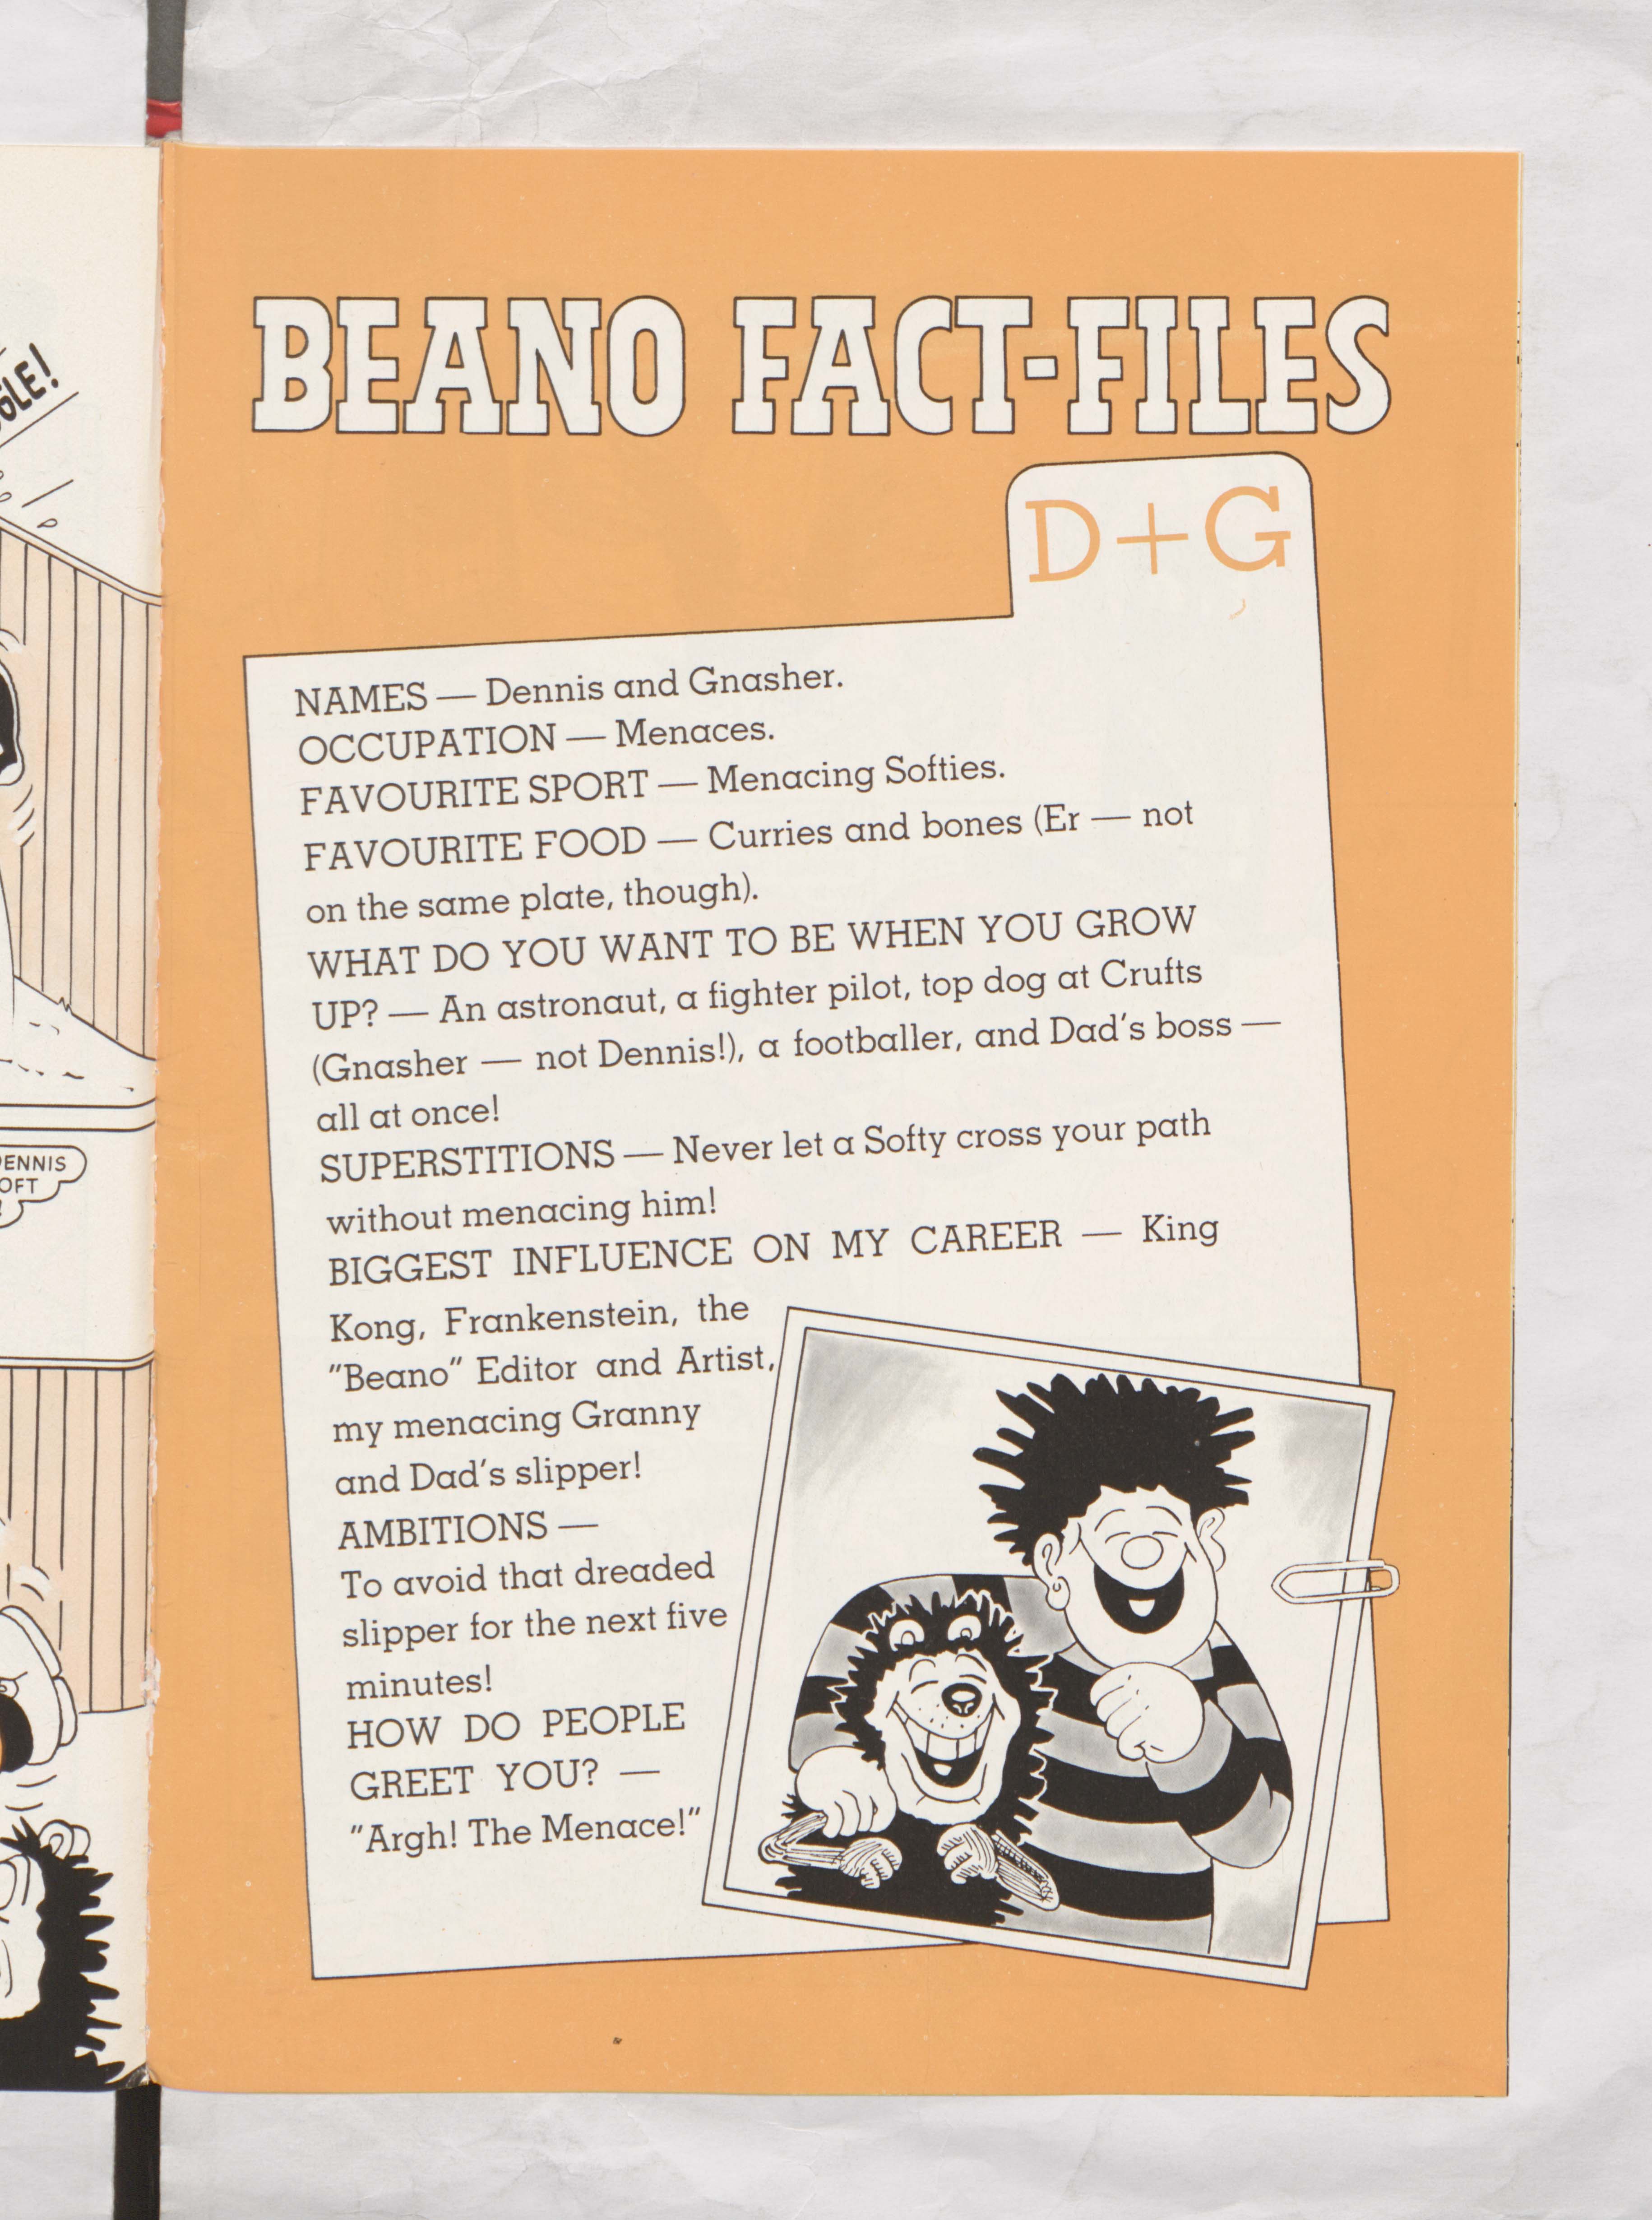 Dennis and Gnasher Beano Book 1987 Annual